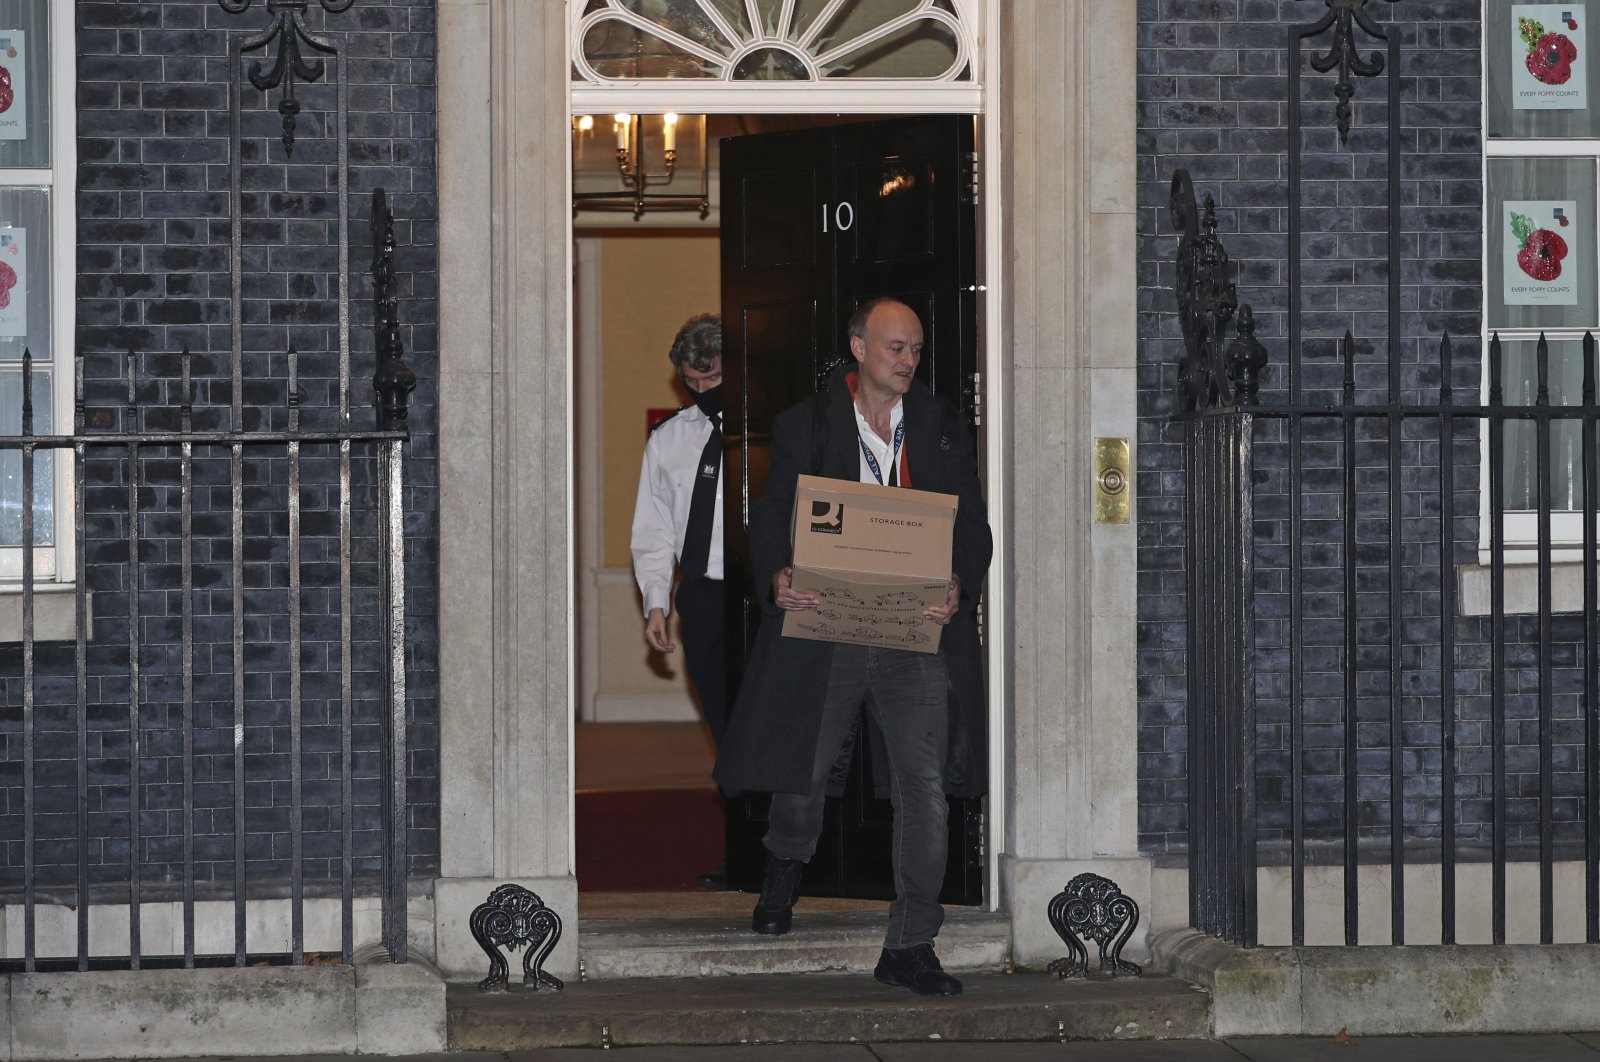 Britain's Prime Minister Boris Johnson's top aide Dominic Cummings leaves 10 Downing Street with a box, in London, Friday, Nov. 13, 2020. (AP Photo)